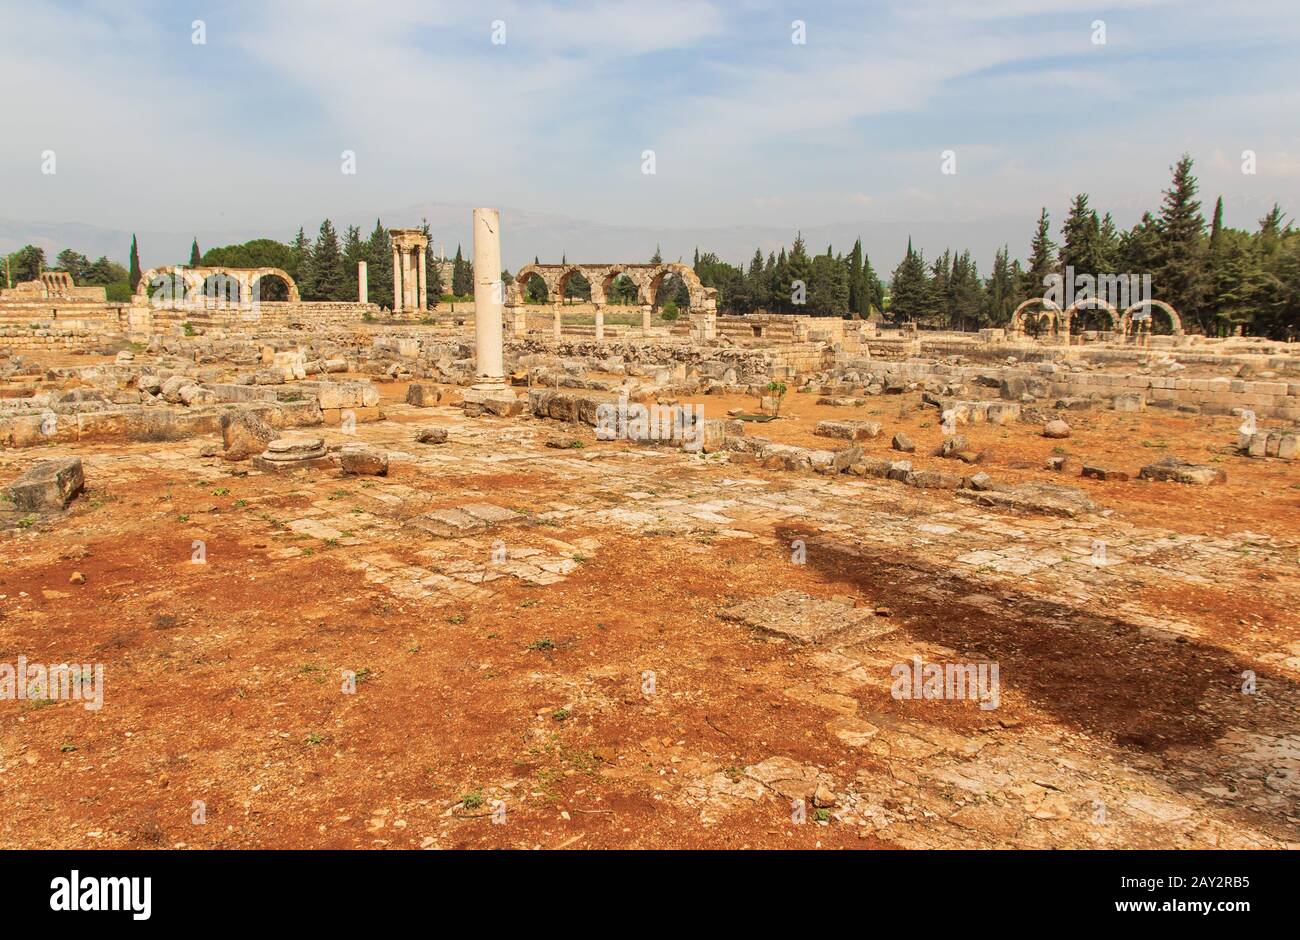 Almost entirely inhabited by Armenians, the village of Anjar is famous for its Umayyad Caliphate ruins, a Unesco World Heritage Site Stock Photo